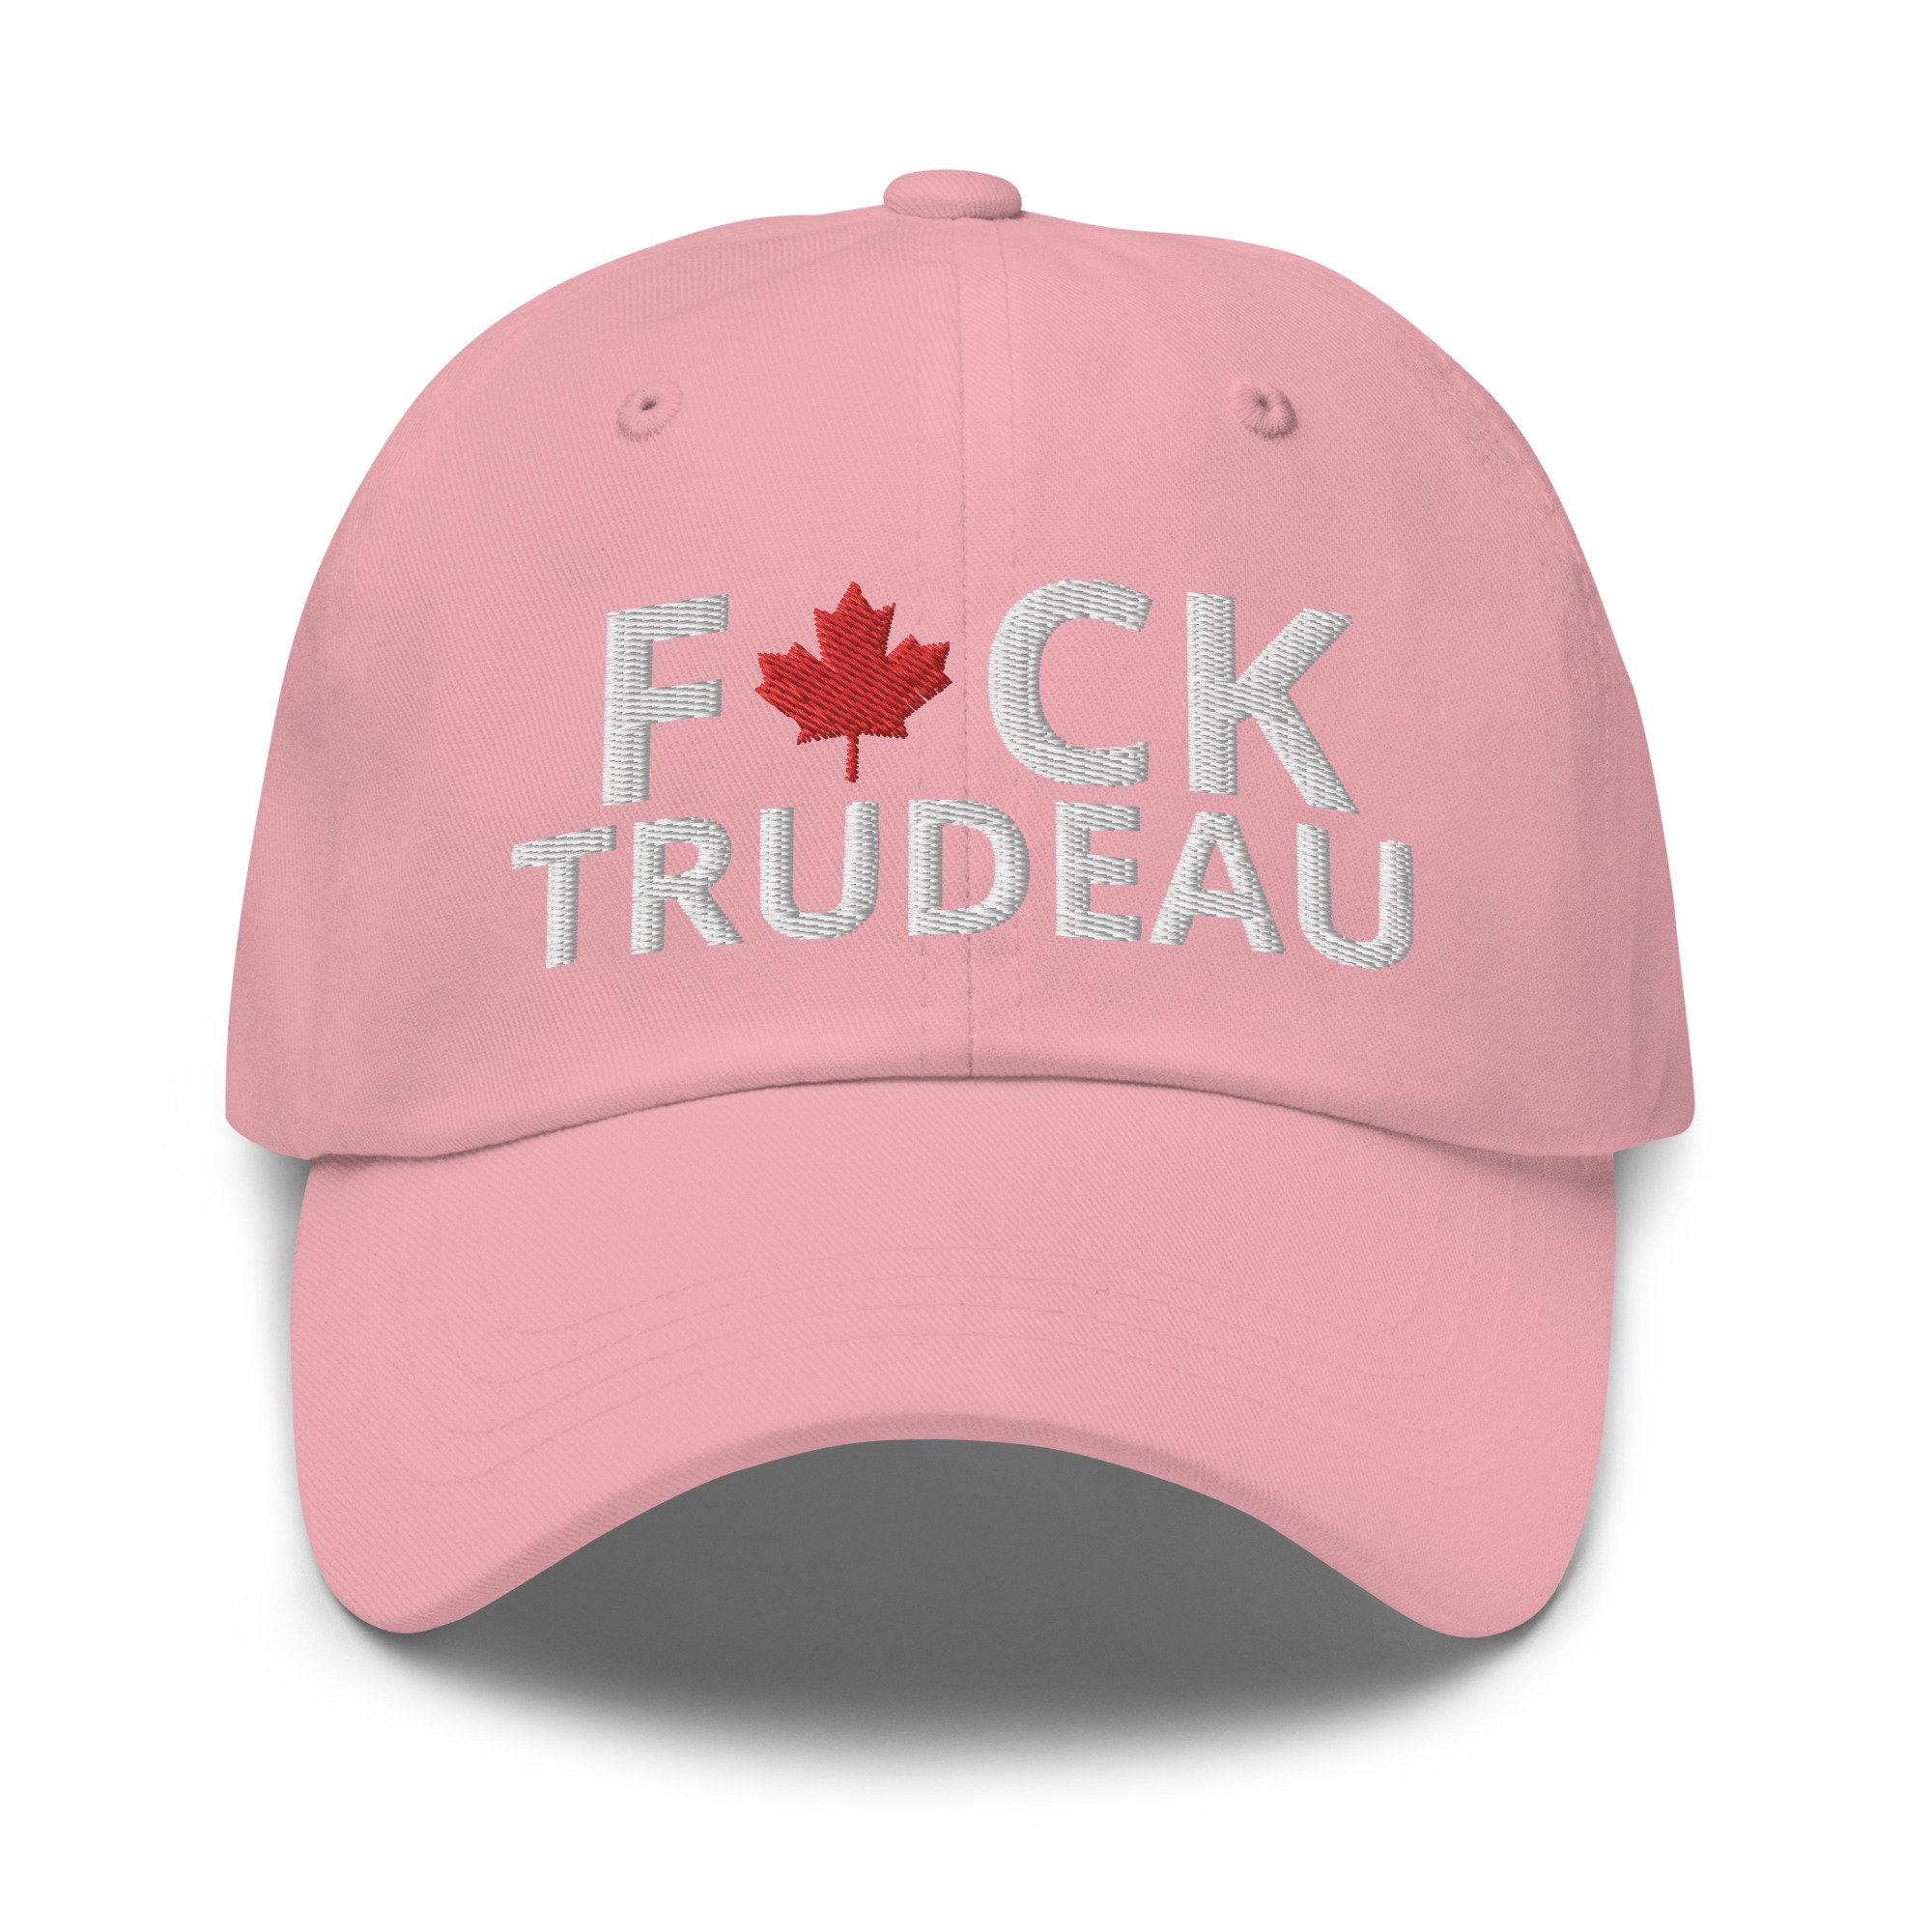 Fuck Trudeau Freedom Convoy 2022 Fringe Minority Canadian Embroidered Hat